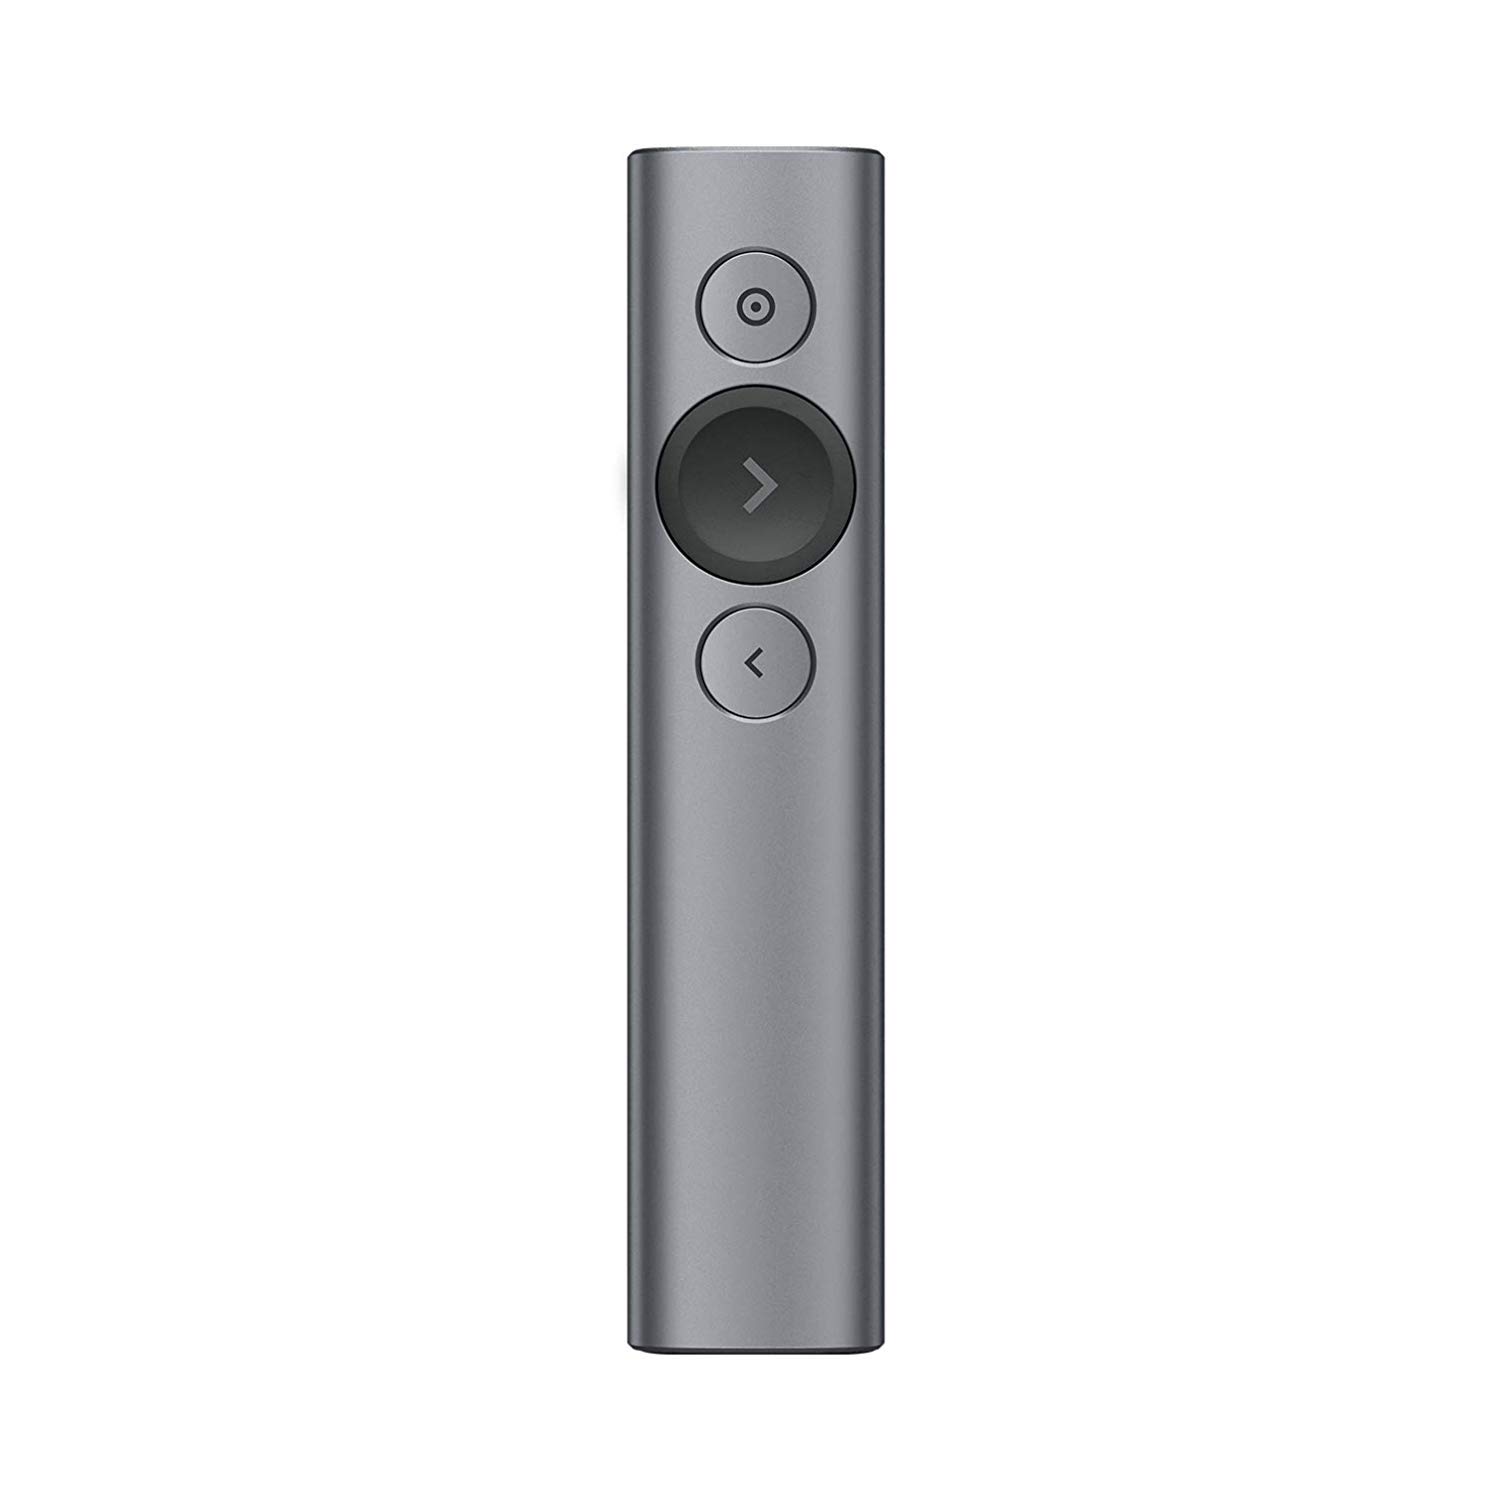 Book Cover (Discontinued) Logitech Spotlight Presentation Remote - Advanced Digital Highlighting with Bluetooth, Universal Compatibility, 30M Range and Quick Charging – Slate